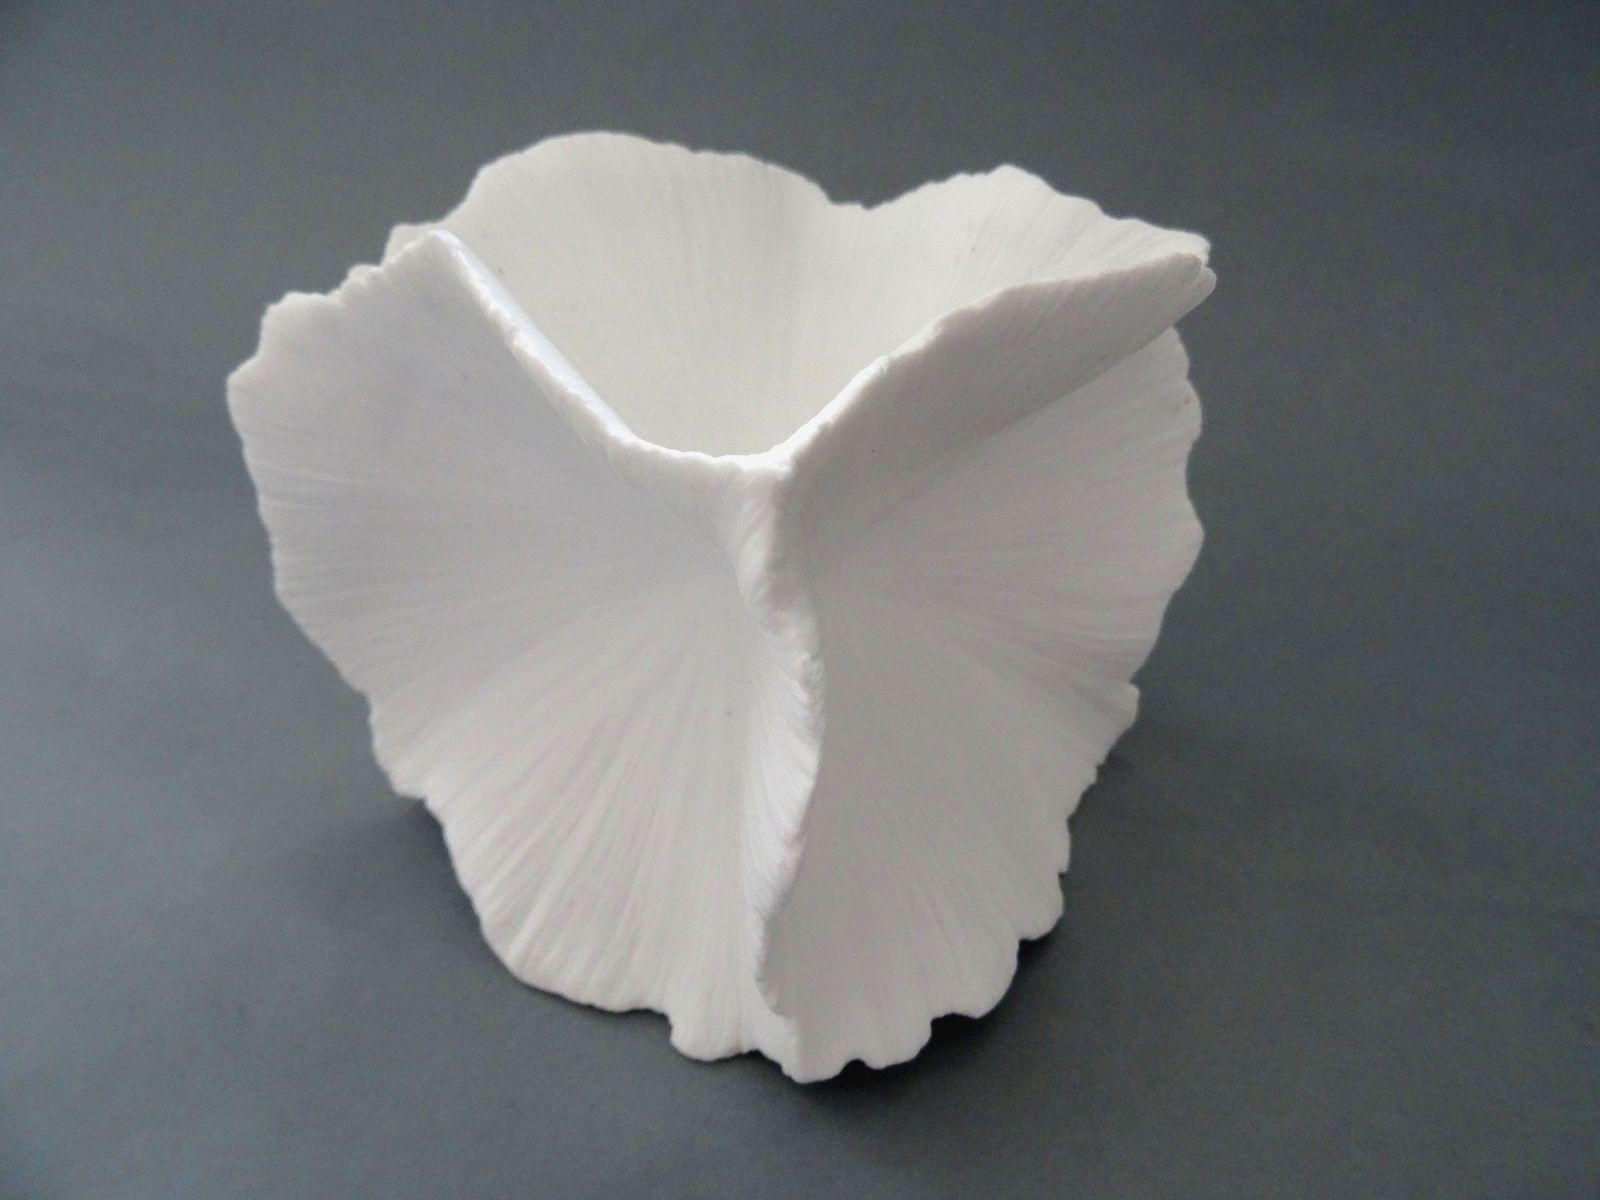 Elina Titane  Abstract Sculpture - Blooming. White porcelain decoration, size 11x11x11 cm